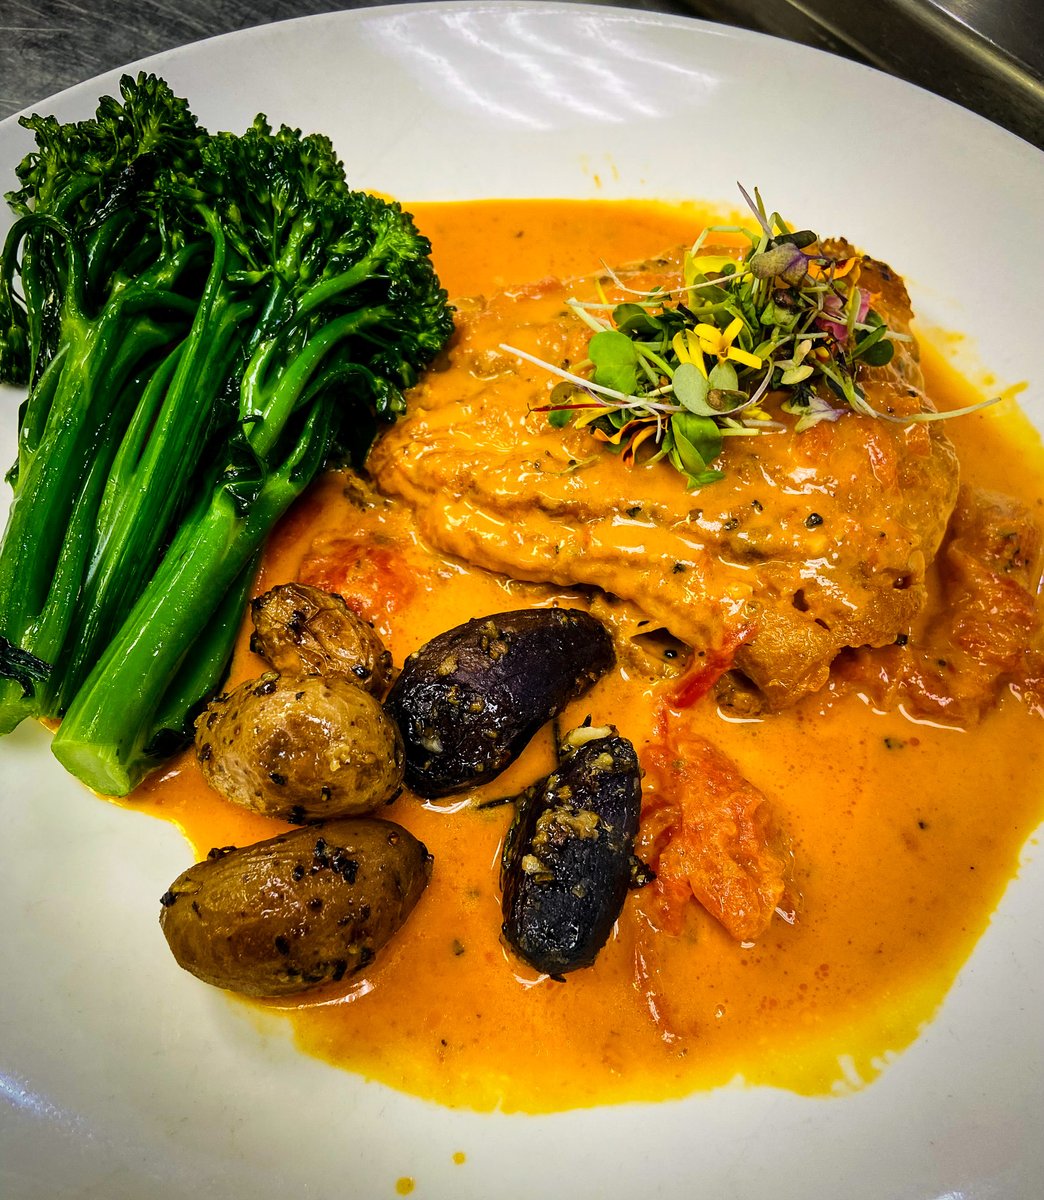 Savor the vibrant flavors of wild-caught American Red Snapper paired with our signature house-made pink sauce, served alongside roasted baby potatoes and broccolini.
#freshcatch #redsnapper #supportlocalbusiness #foodandwine #virginiafoodies #visitalx #onlineordering #dmvfoodie